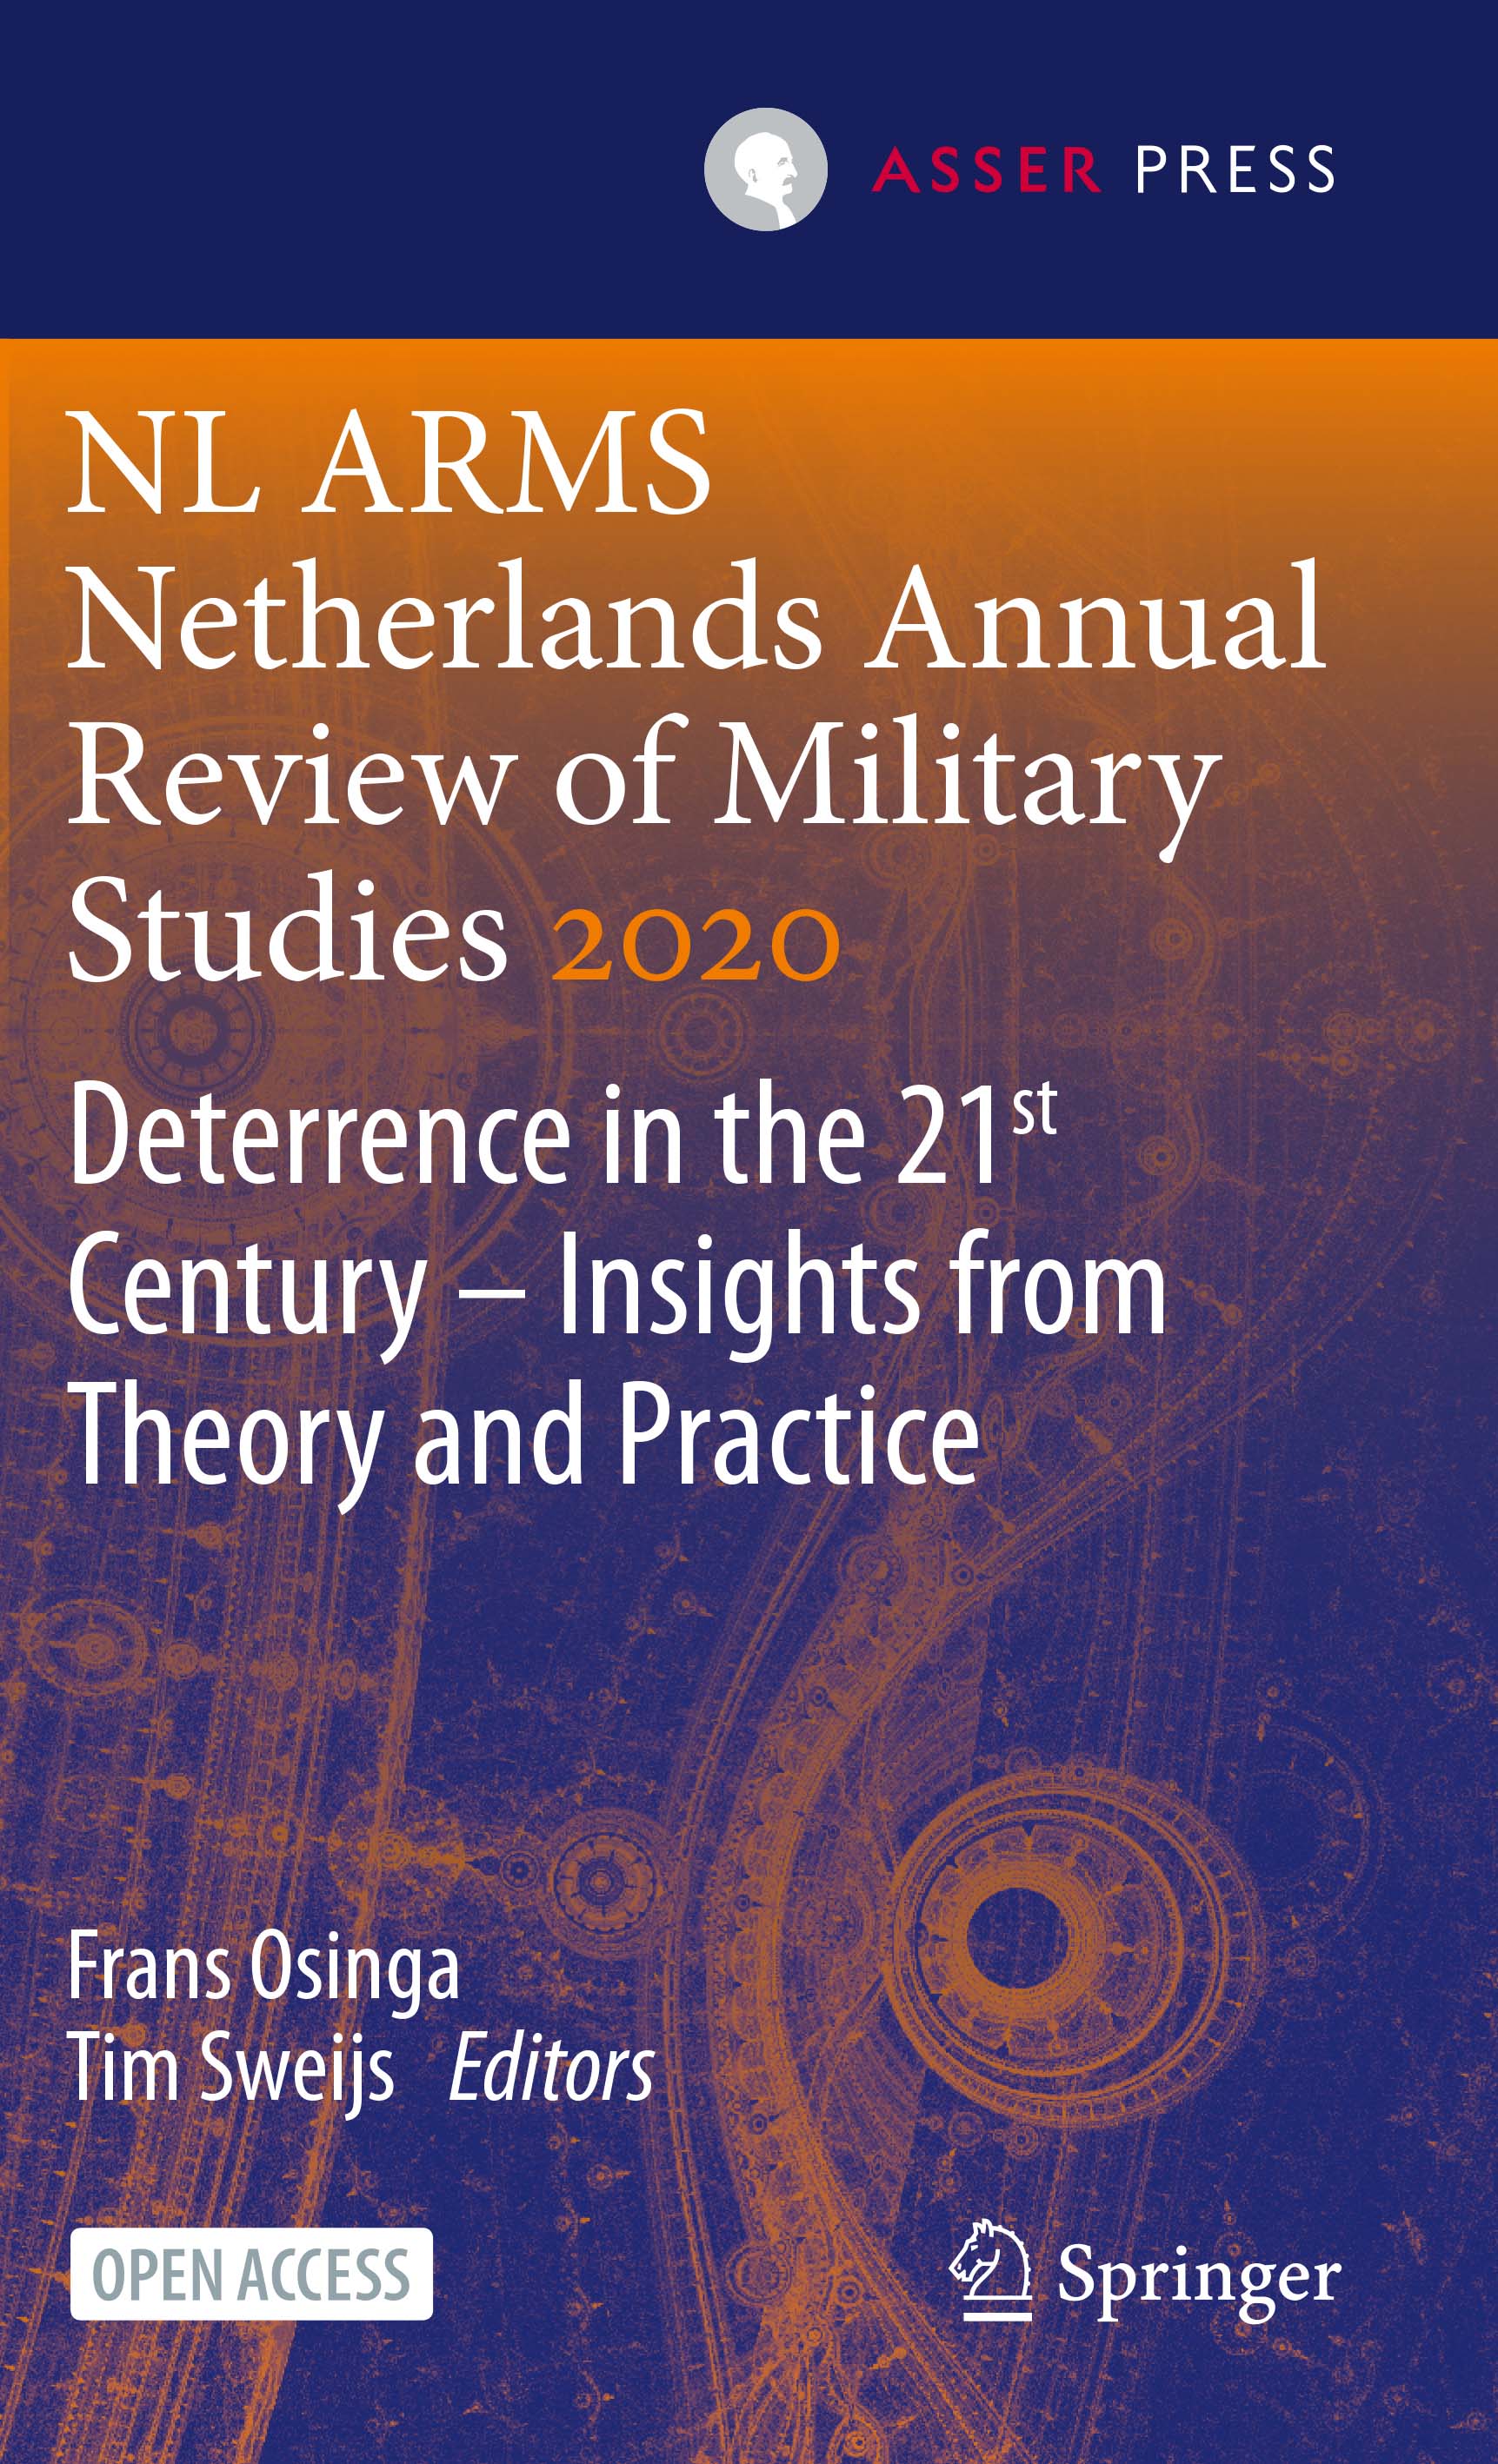 NL ARMS 2020 - Deterrence in the 21st Century – Insights from Theory and Practice